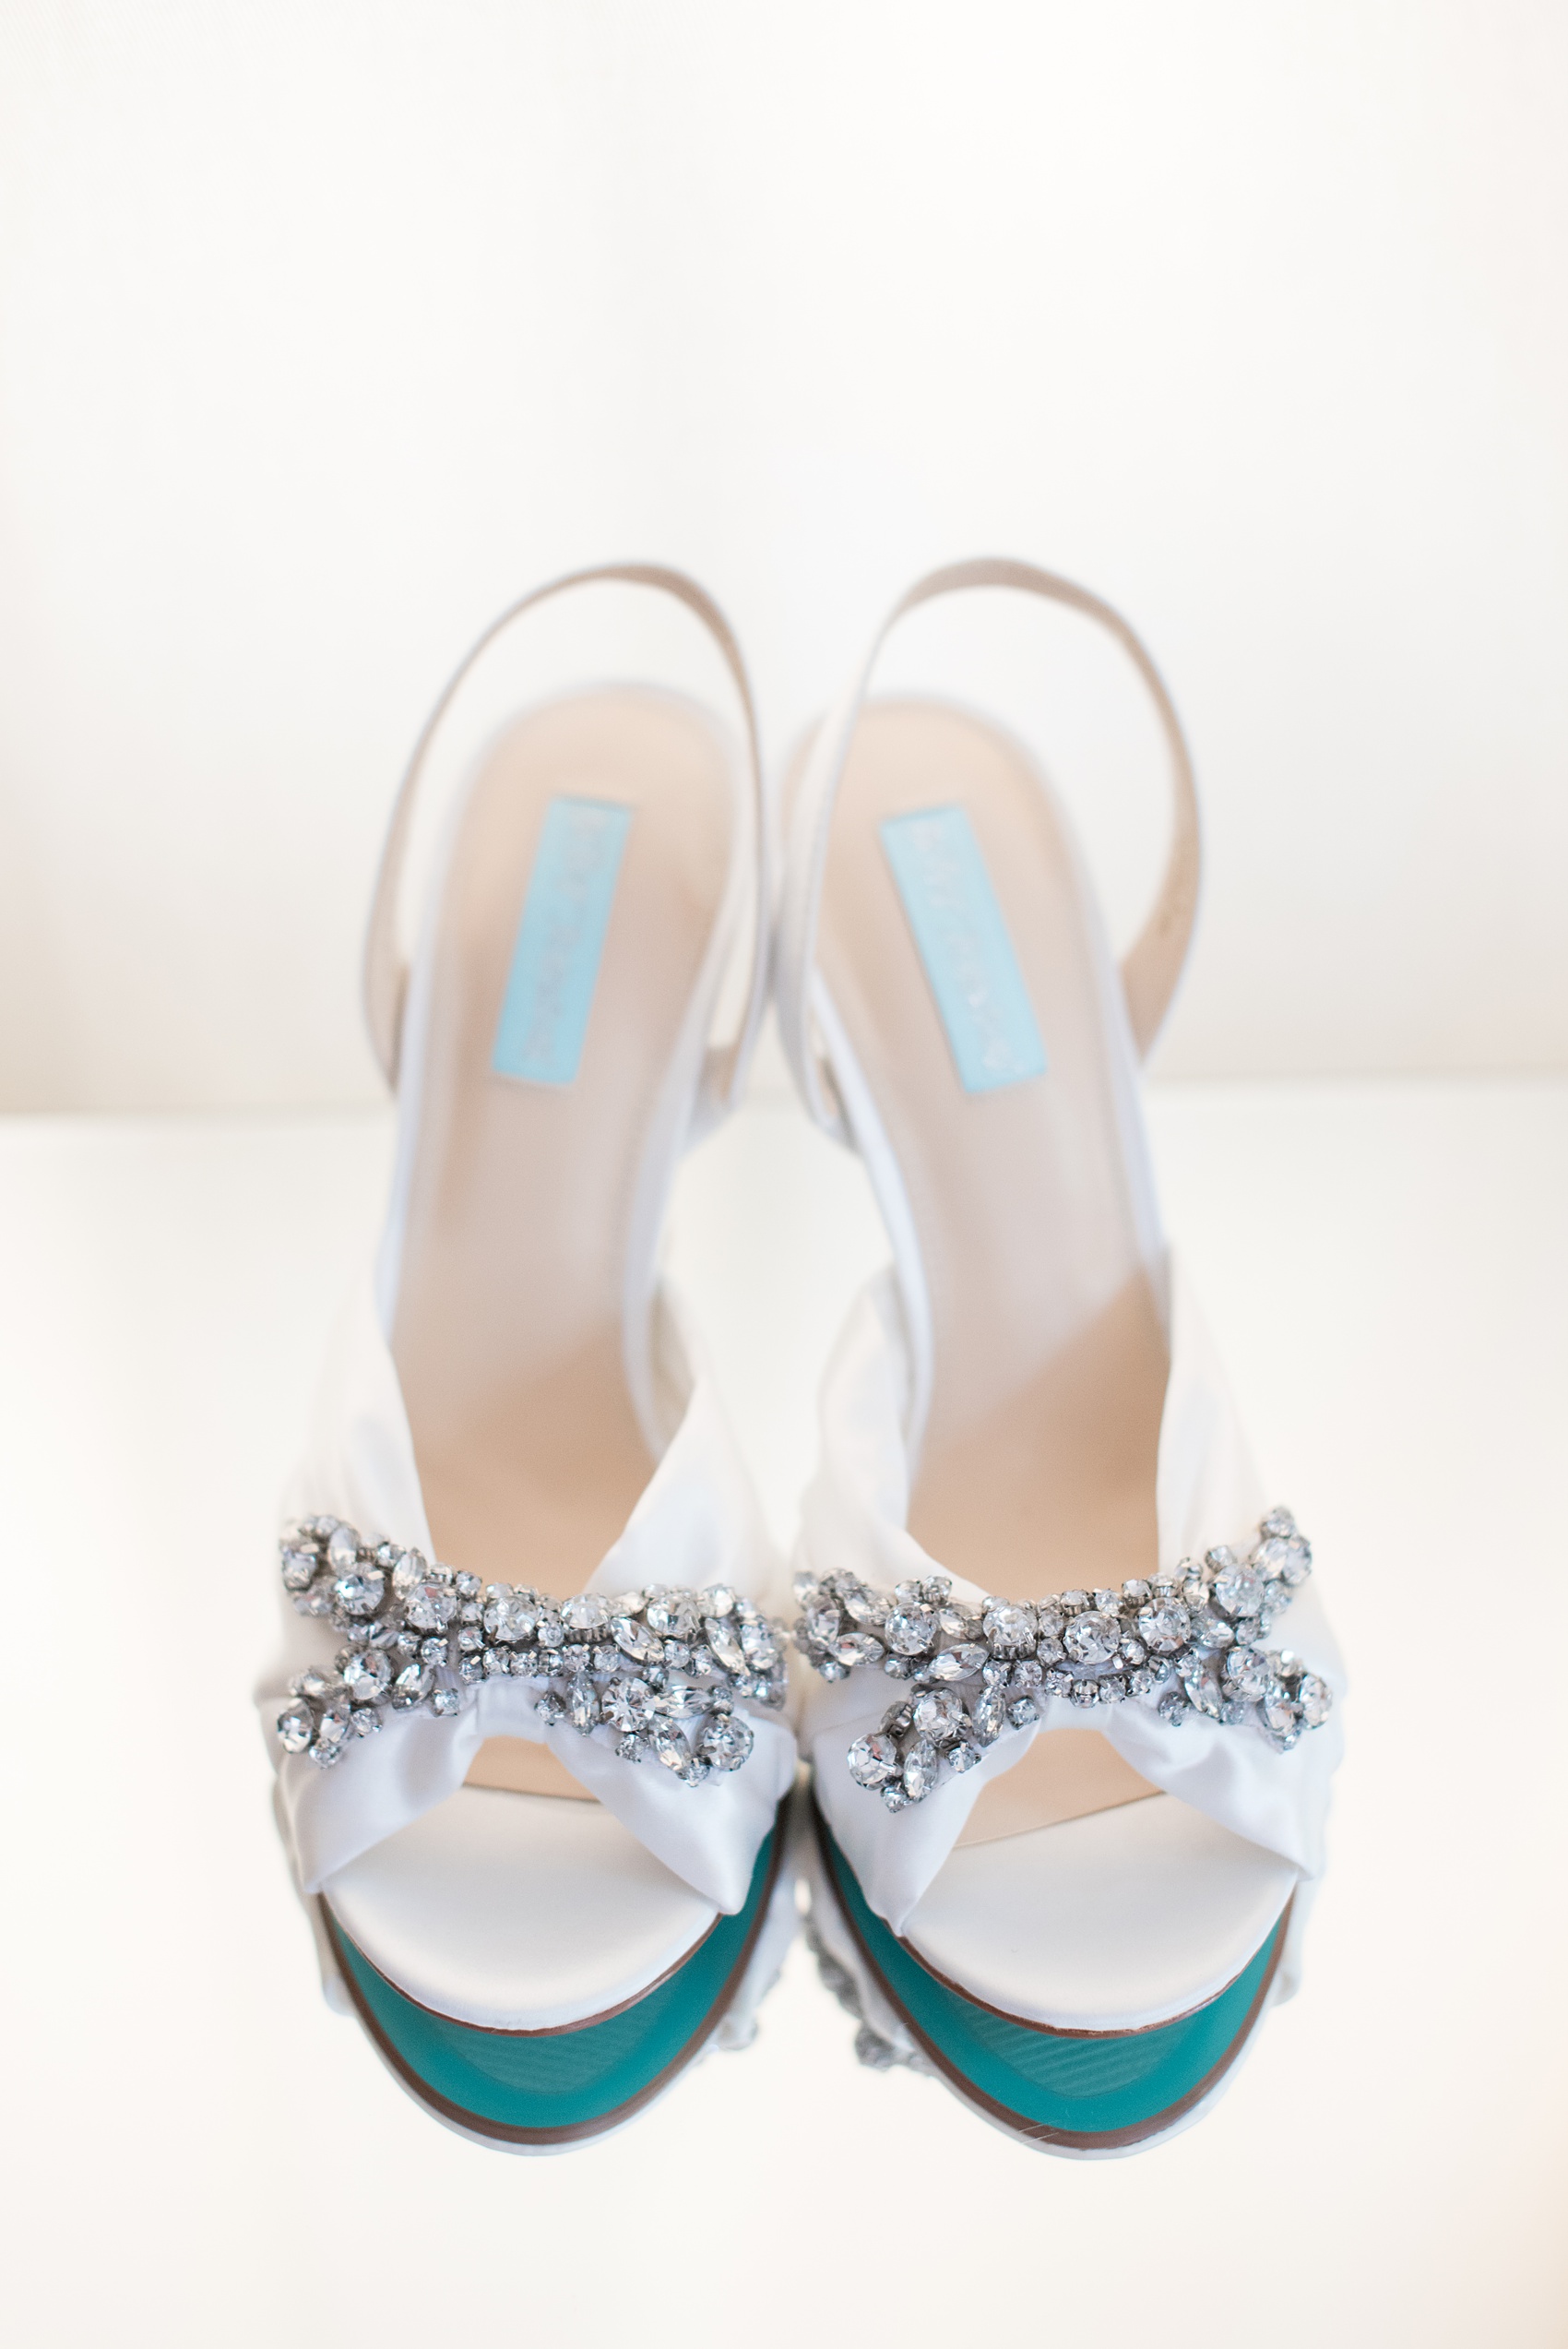 Mikkel Paige Photography pictures of a wedding at Leslie-Alford Mim's House in North Carolina for a Mad Dash Weddings event. Photo of the bride's blue-soled Betsey Johnson rhinestone bridal day shoes.